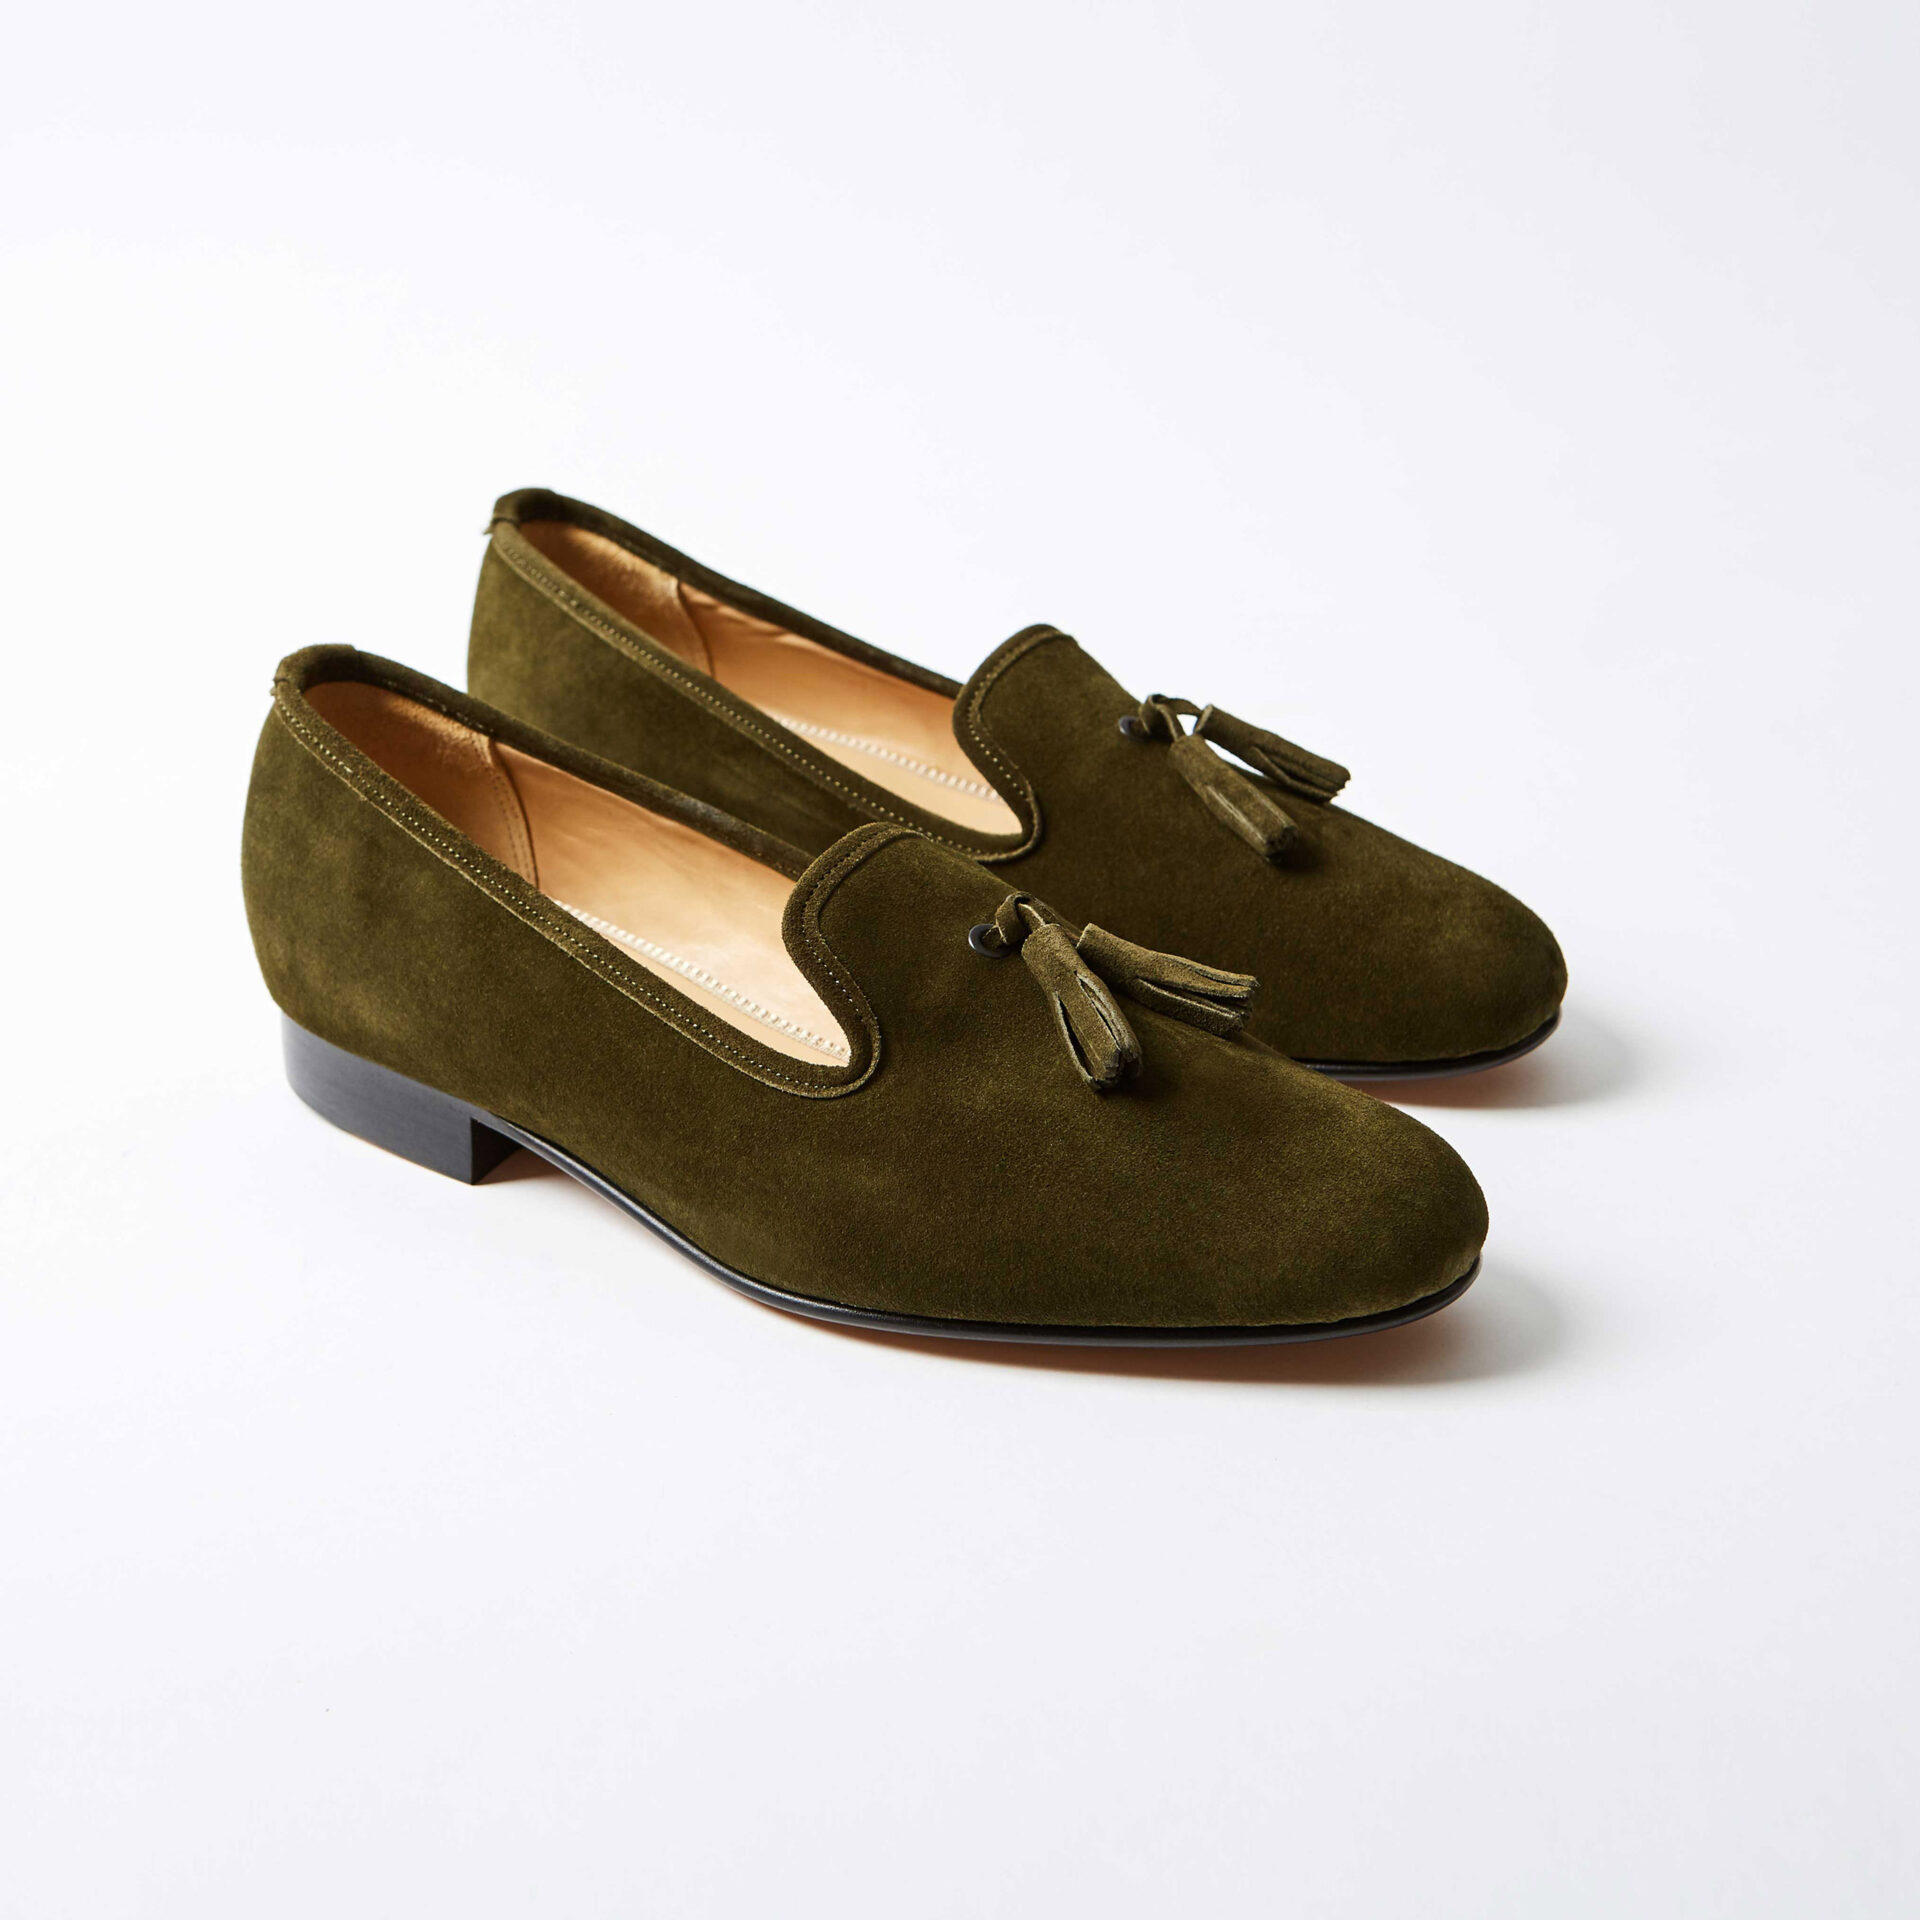 Olive Suede Albert Slippers with Tassel Bowhill & Elliott